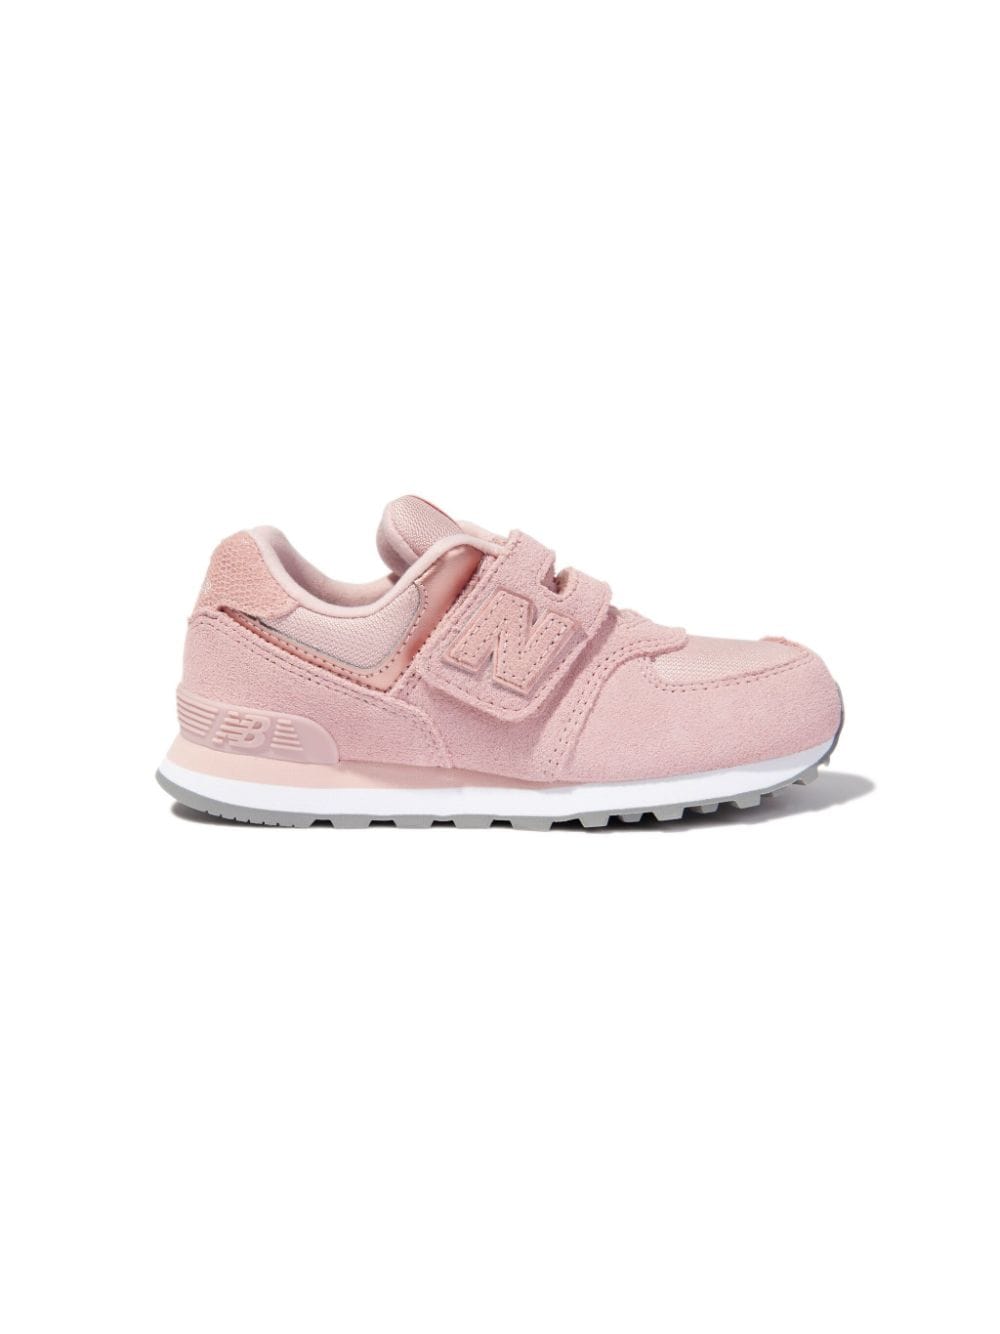 New Balance Kids' 393 V1 Touch-strap Suede Sneakers In Pink